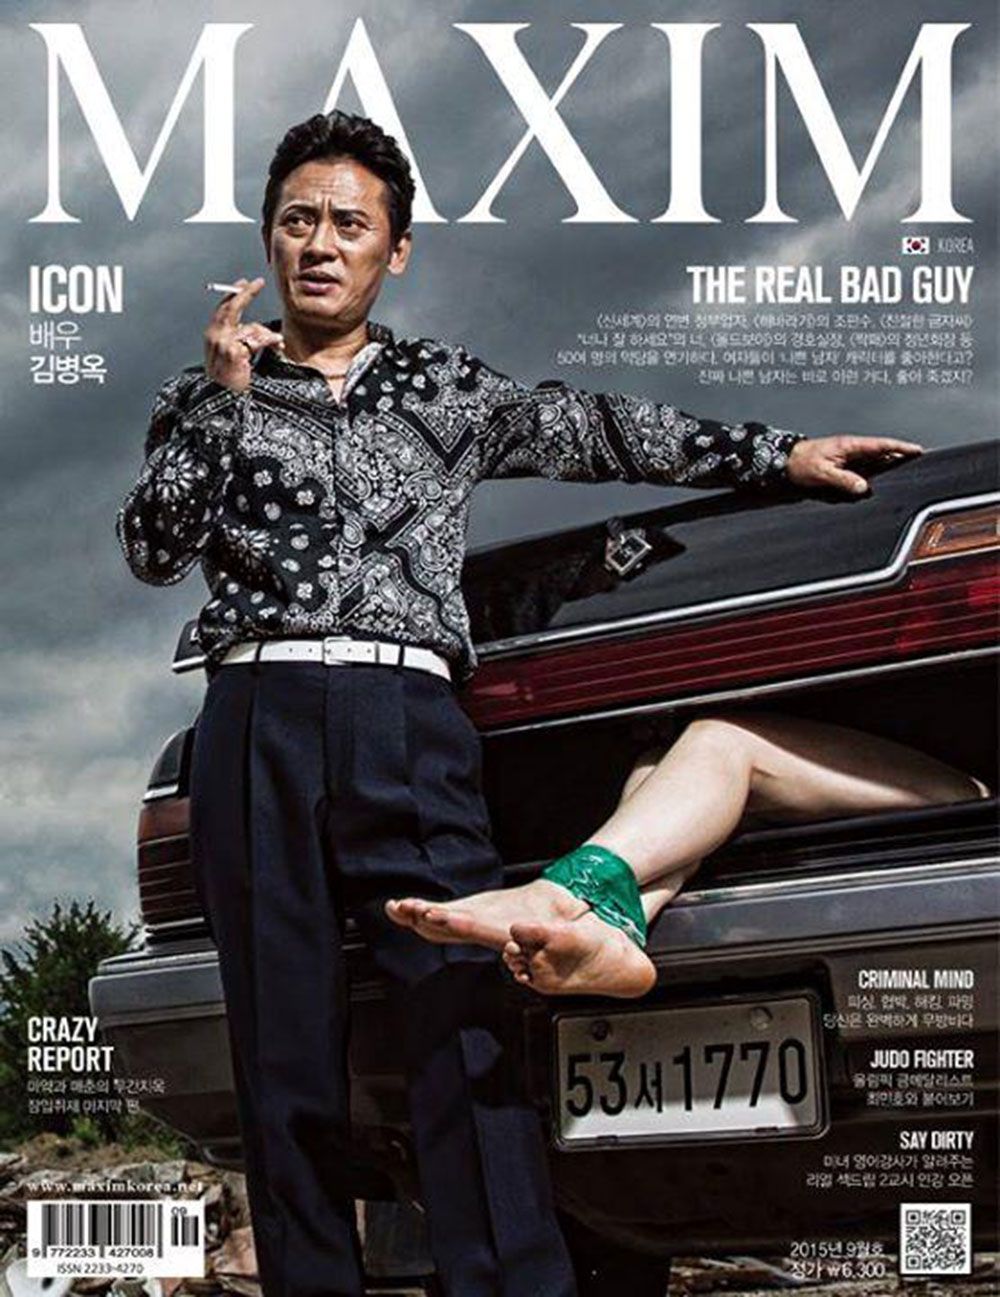 Maxim Korea features a man posing next to a woman tied up in a car boot photo